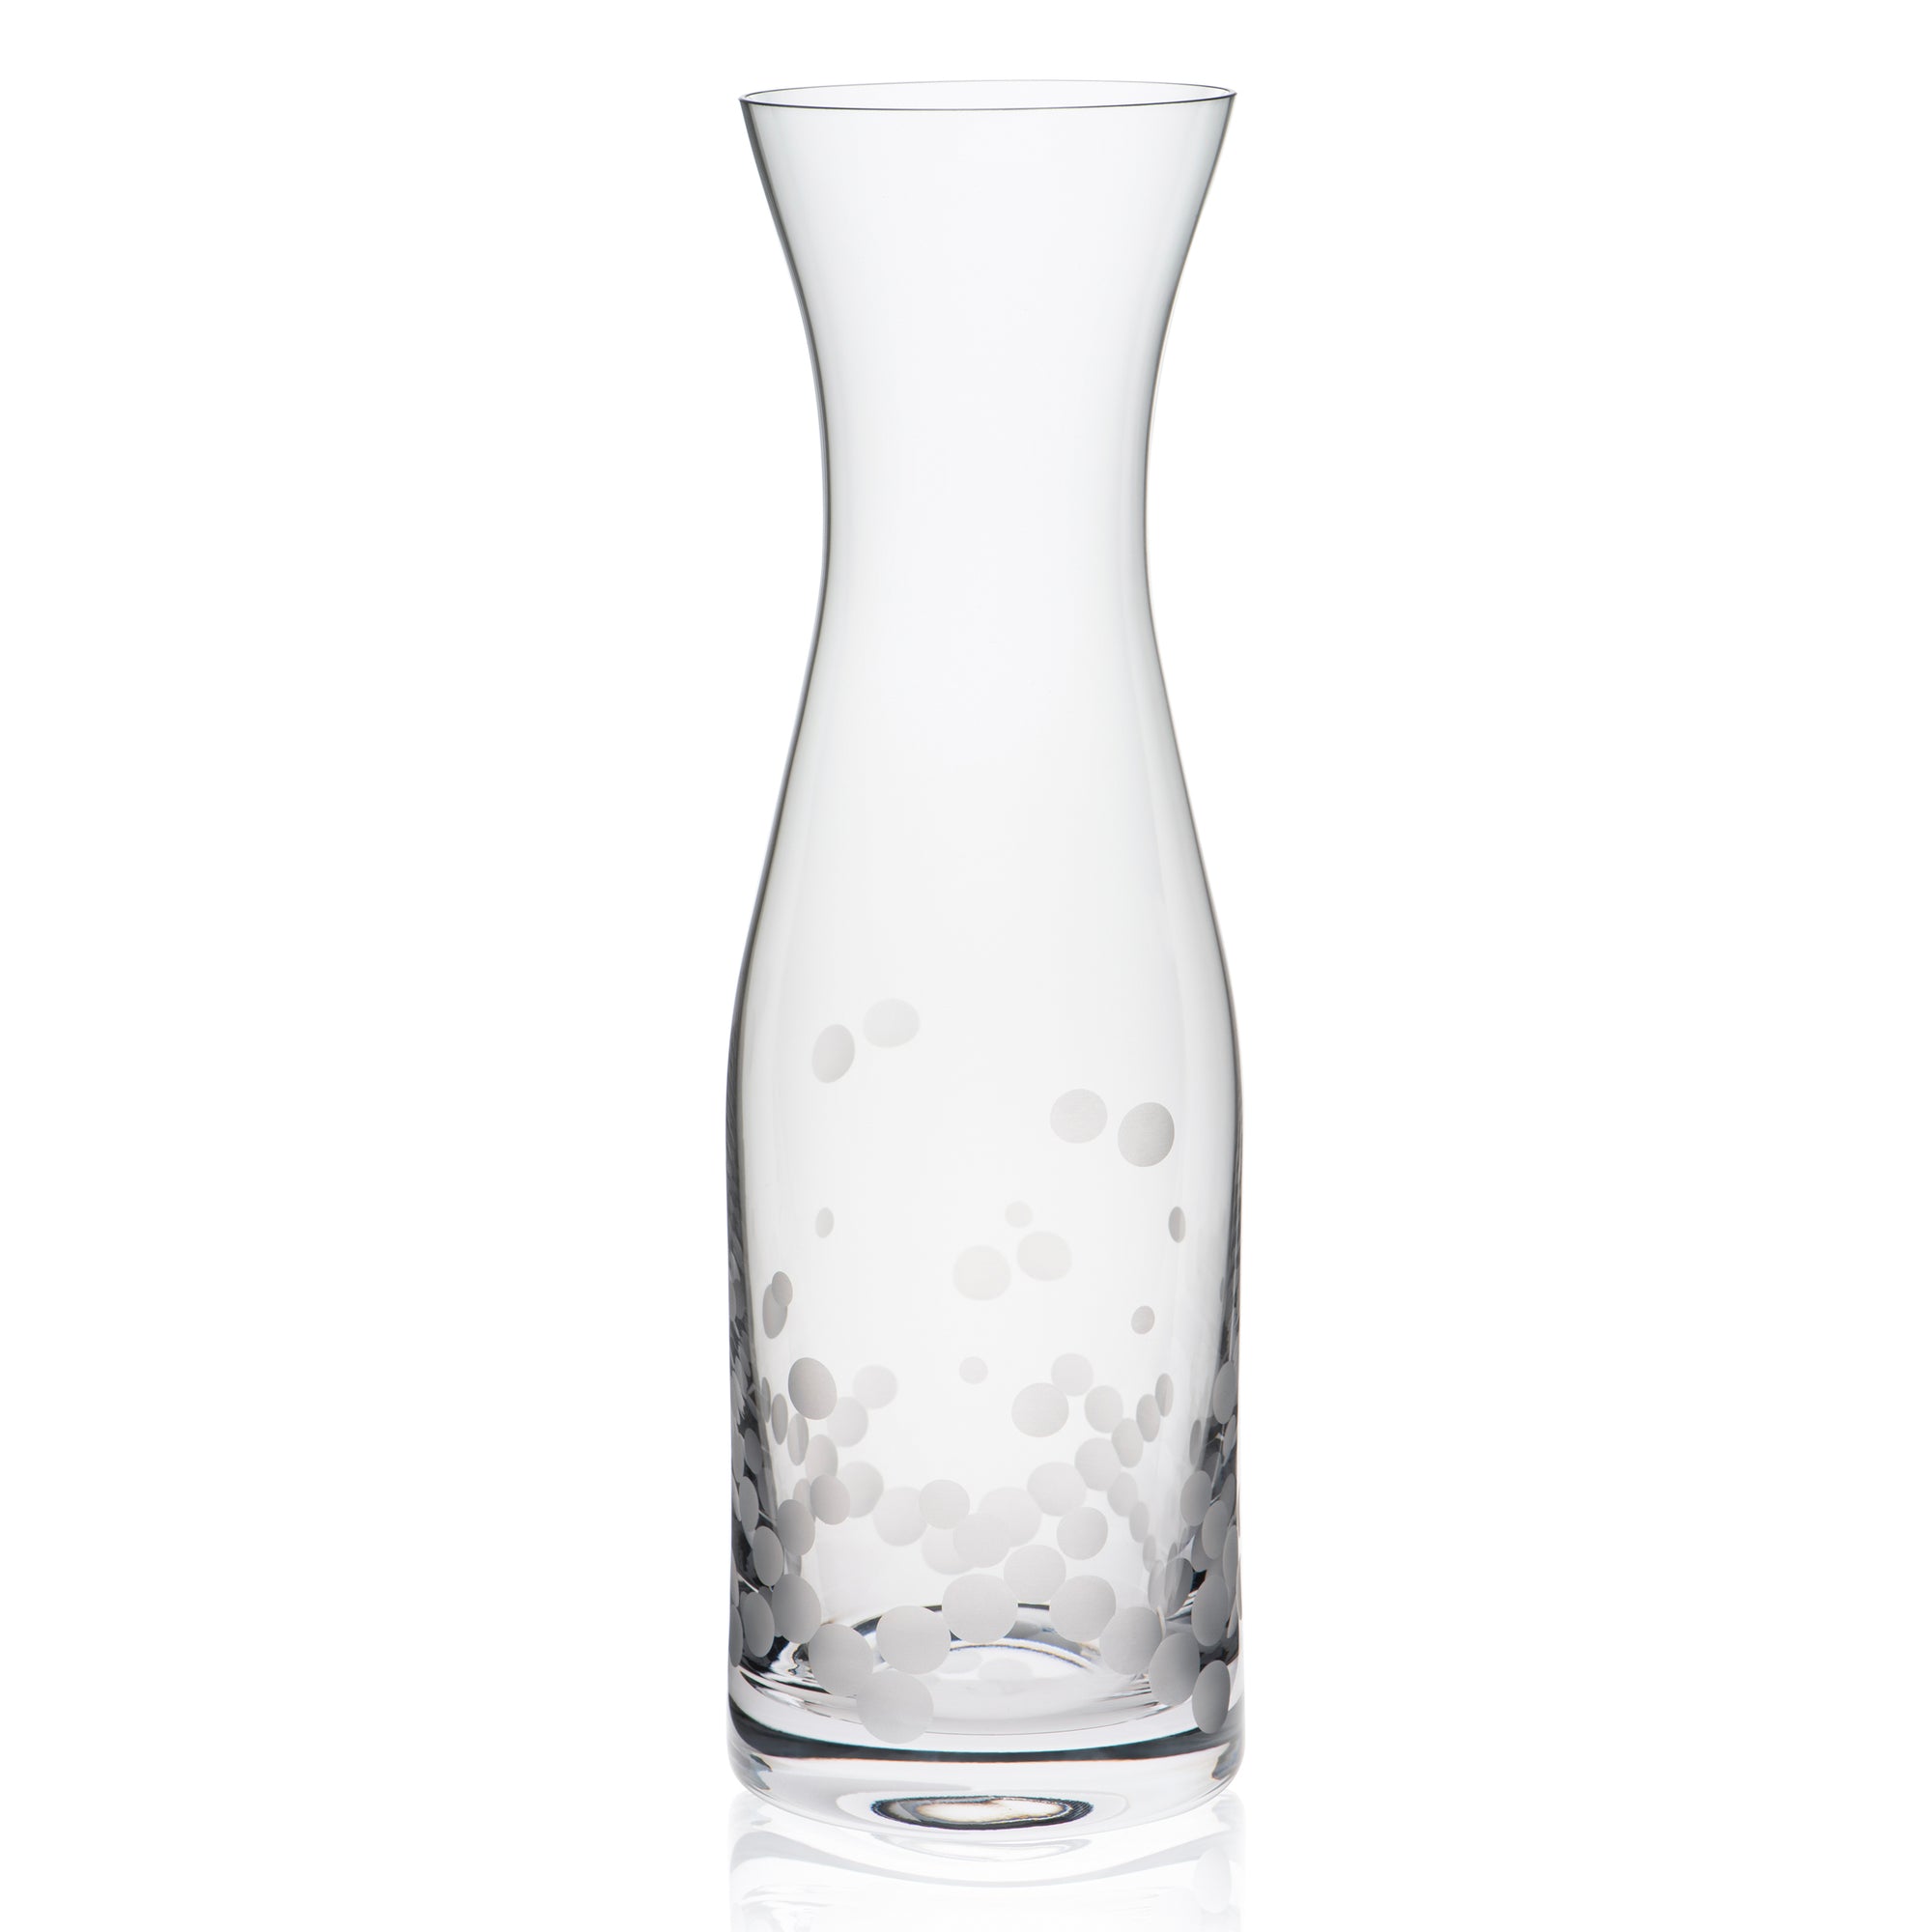 Chatham Pop etched crystal carafe from Caskata.